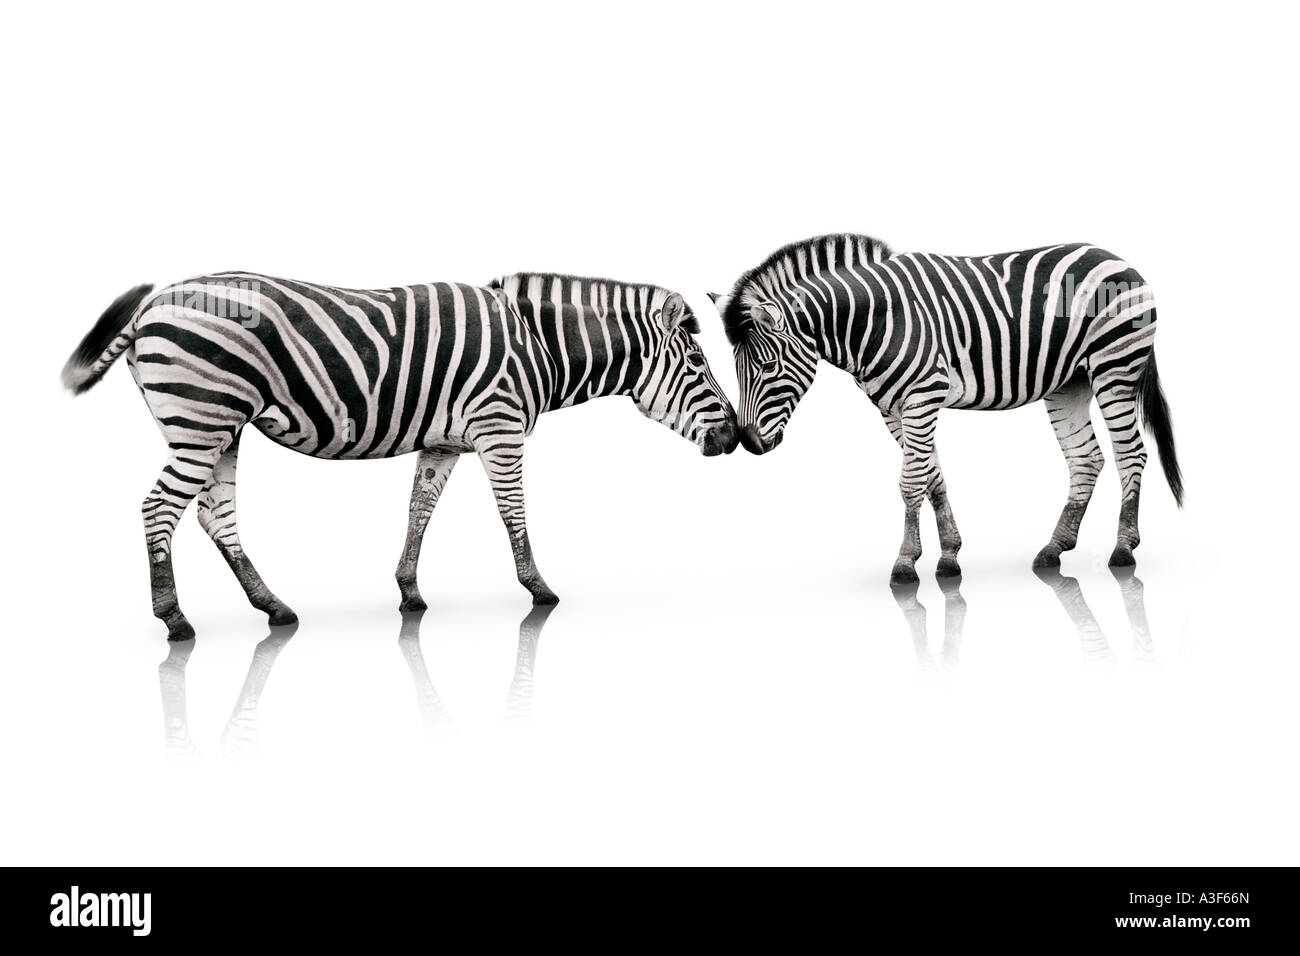 Zebra nose Cut Out Stock Images & Pictures - Alamy